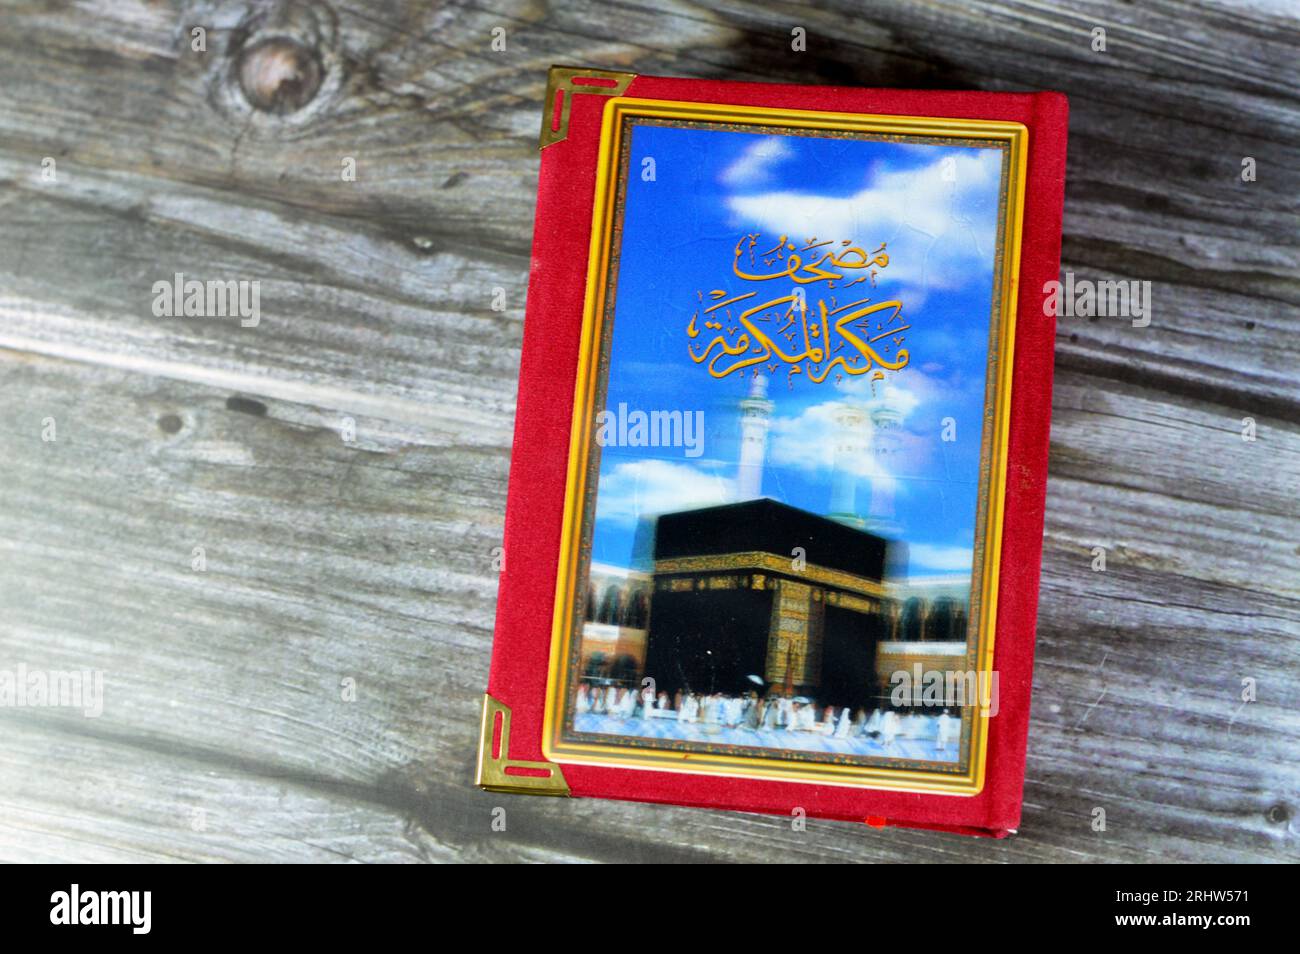 Makkah al-Mukarramah or Mecca the honored Quran  textbook, with a blurry glowing picture of Al Masjid Al Haram with Kaaba and minarets, Central book o Stock Photo